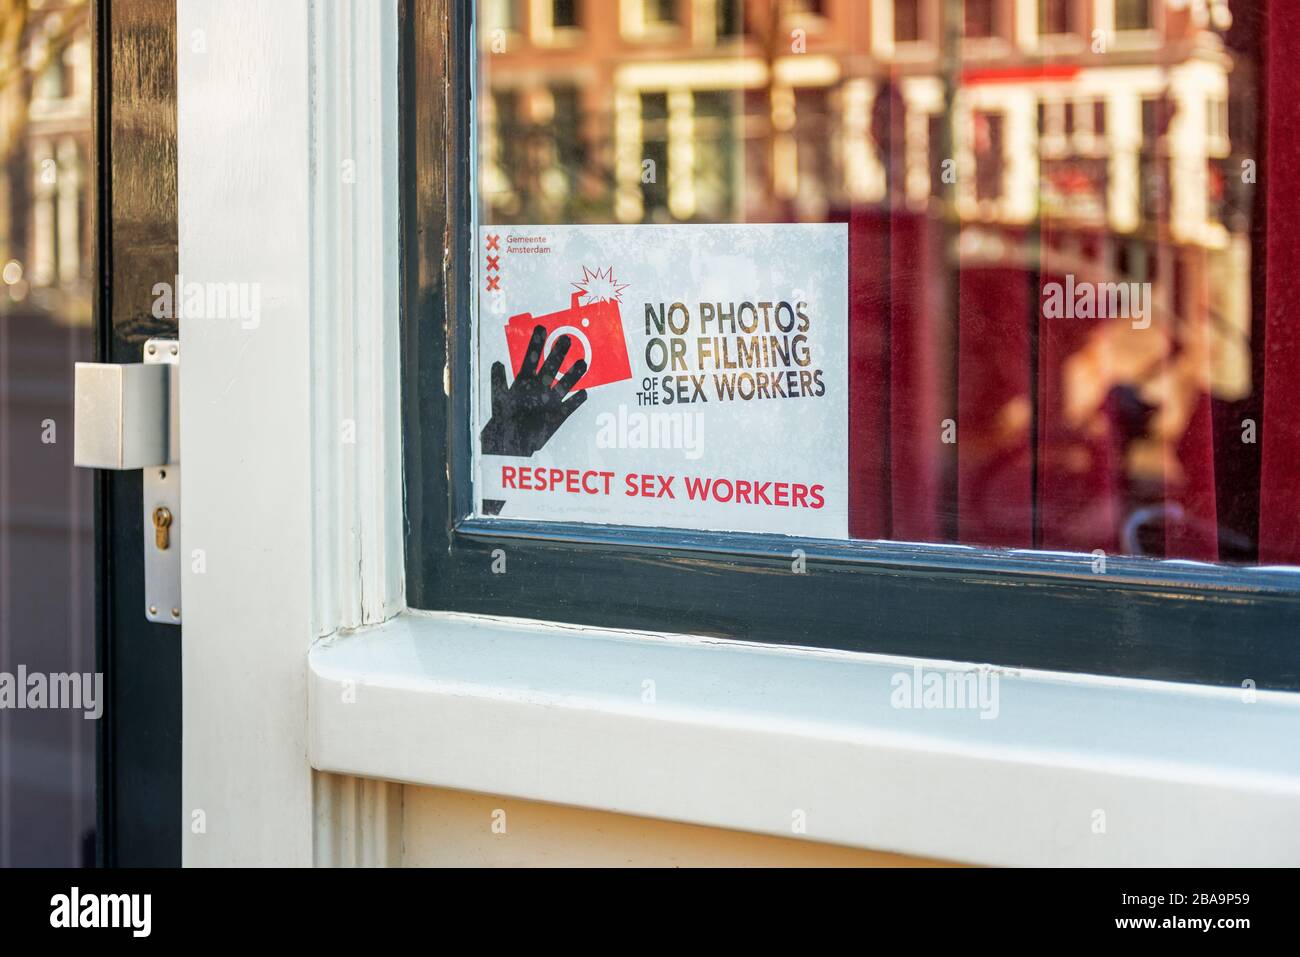 Respect Sex Workers Sign in Red Light District of Amsterdam, Netherlands. People are requested not to film or take photos. Stock Photo